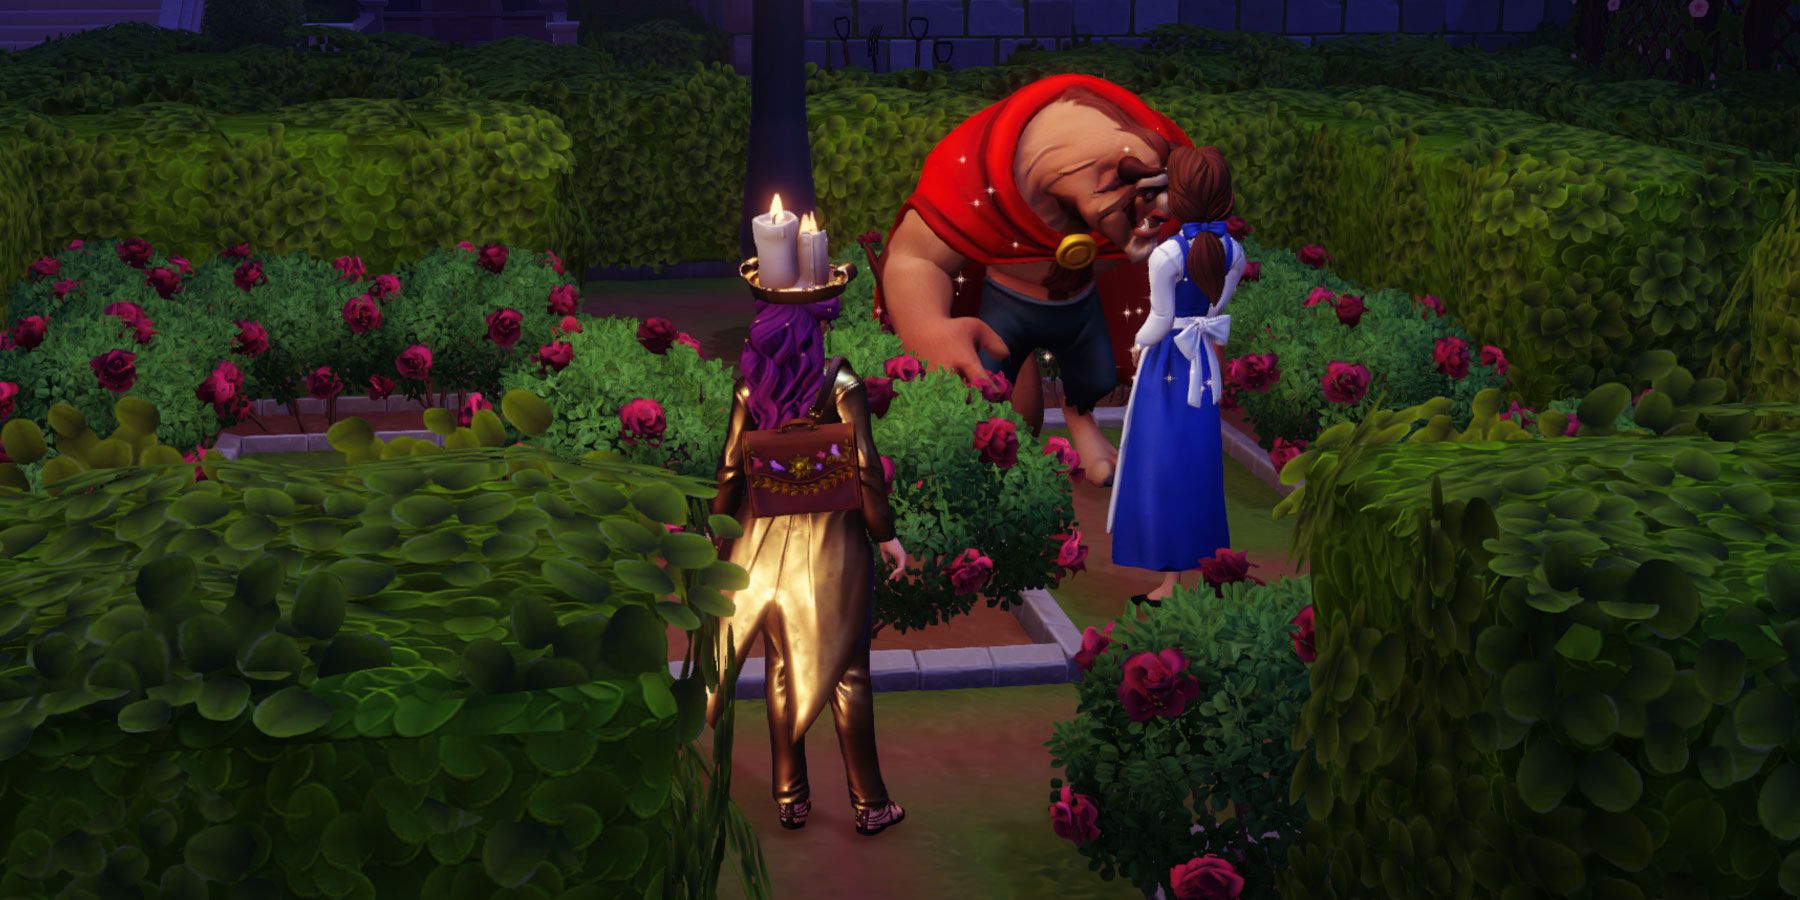 Belle and The Beast in the Garden in Beauty and the Beast realm in Disney Dreamlight Valley.